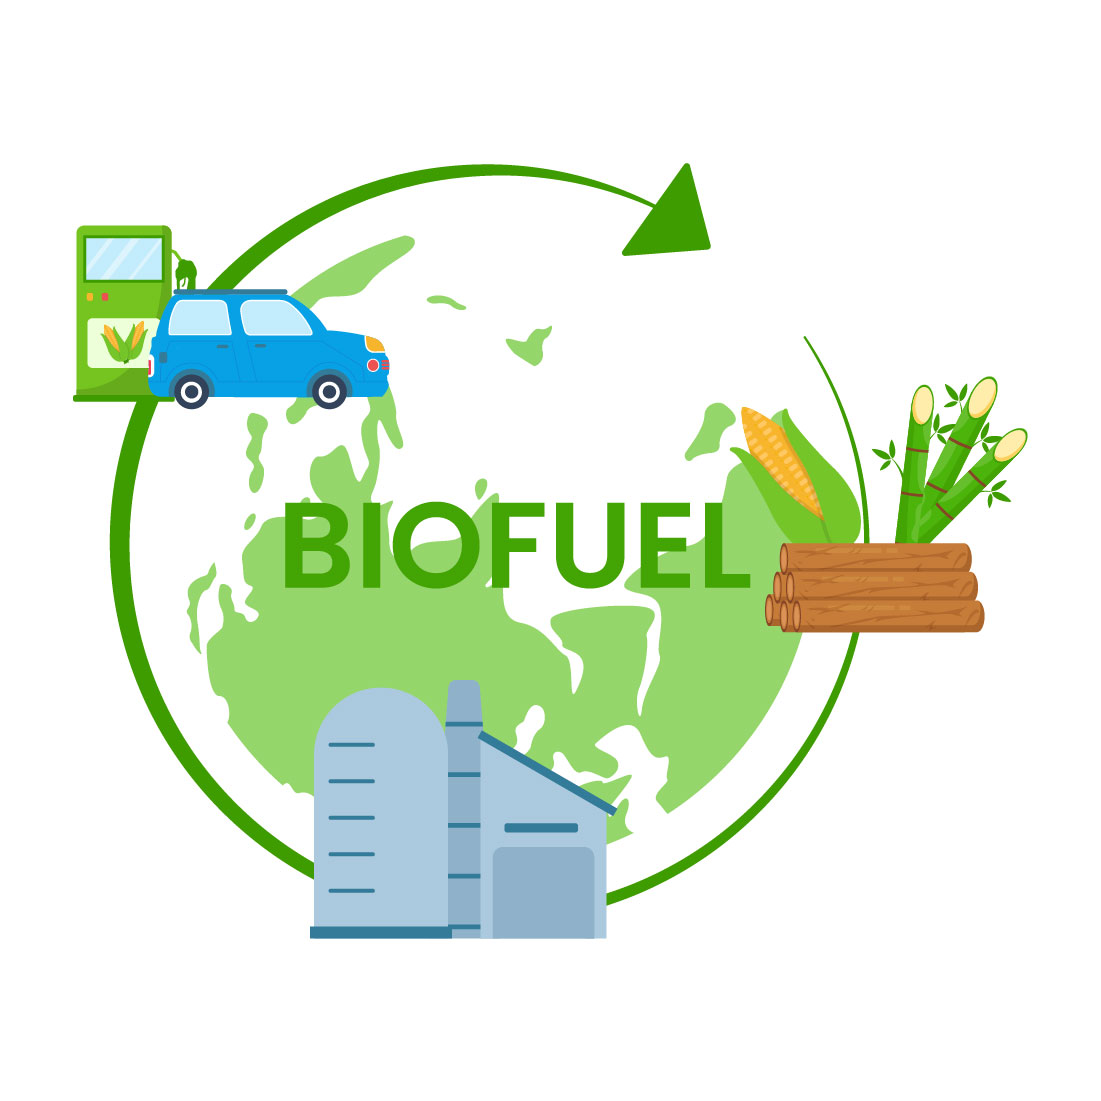 Life Cycle Biofuel Illustration cover image.